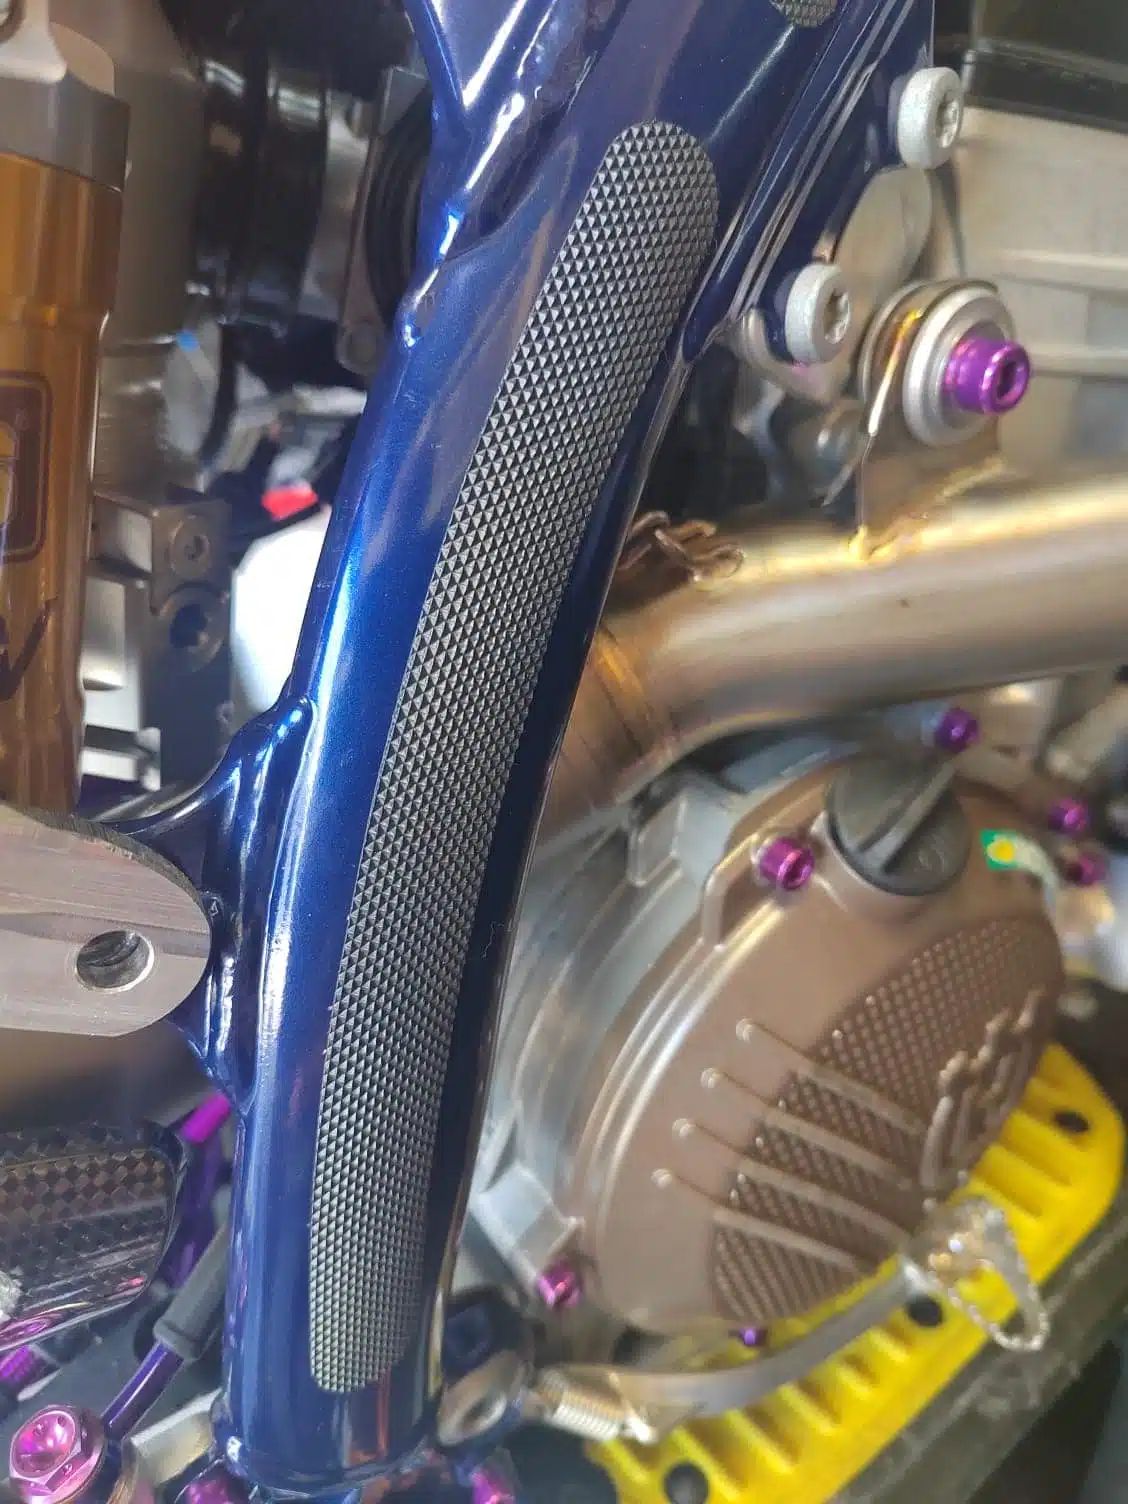 Black grip tape applied to a blue frame of a dirt bike with engine exposed